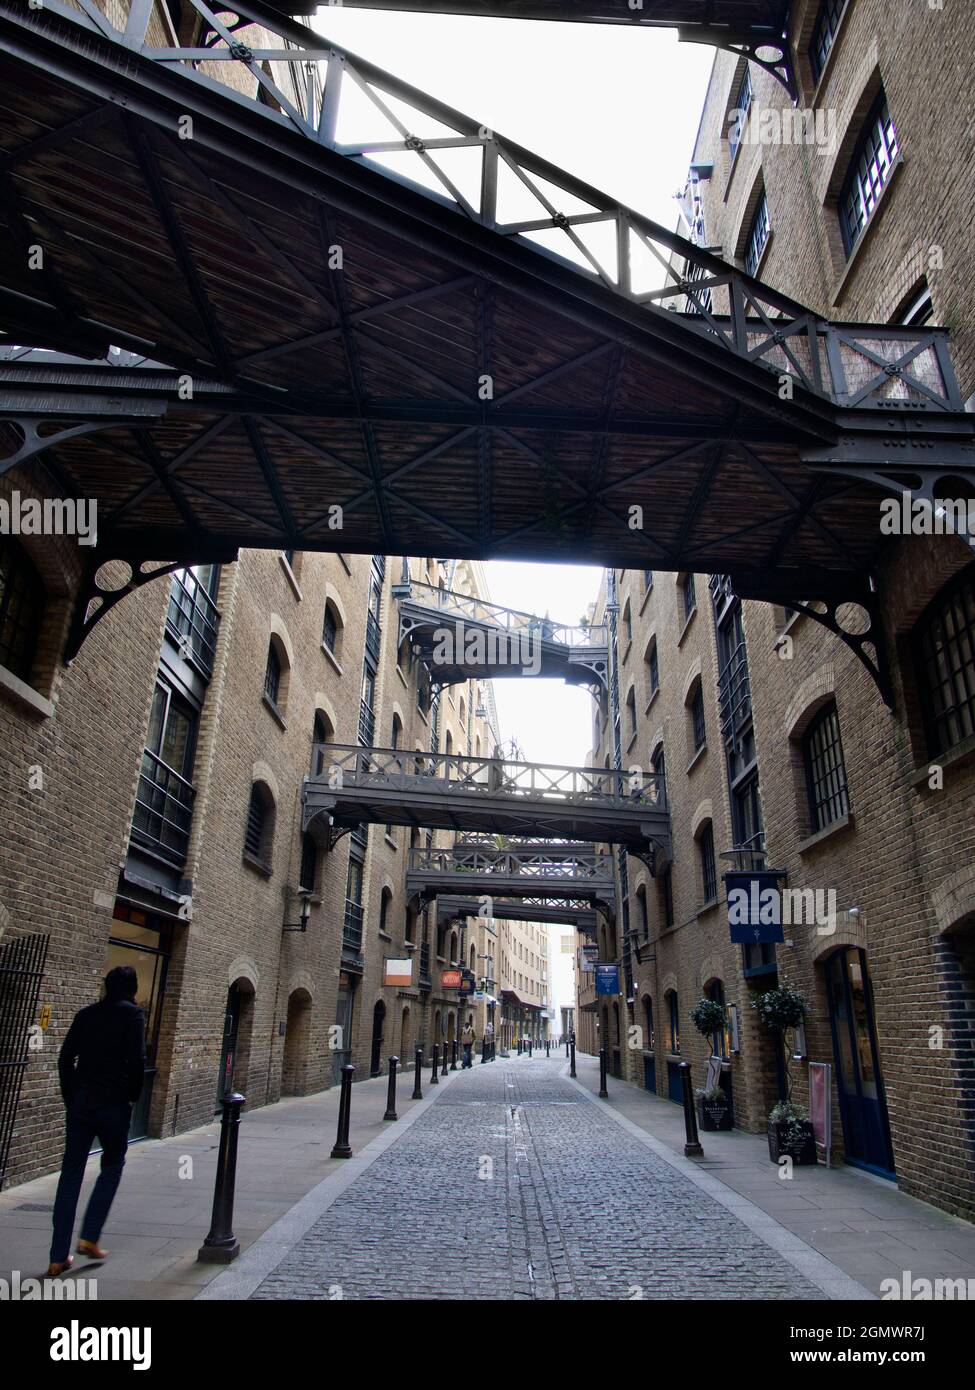 Shad Thames is now the best surviving example of a type of commercial street that was common in London Dockland before its gentrification and developm Stock Photo